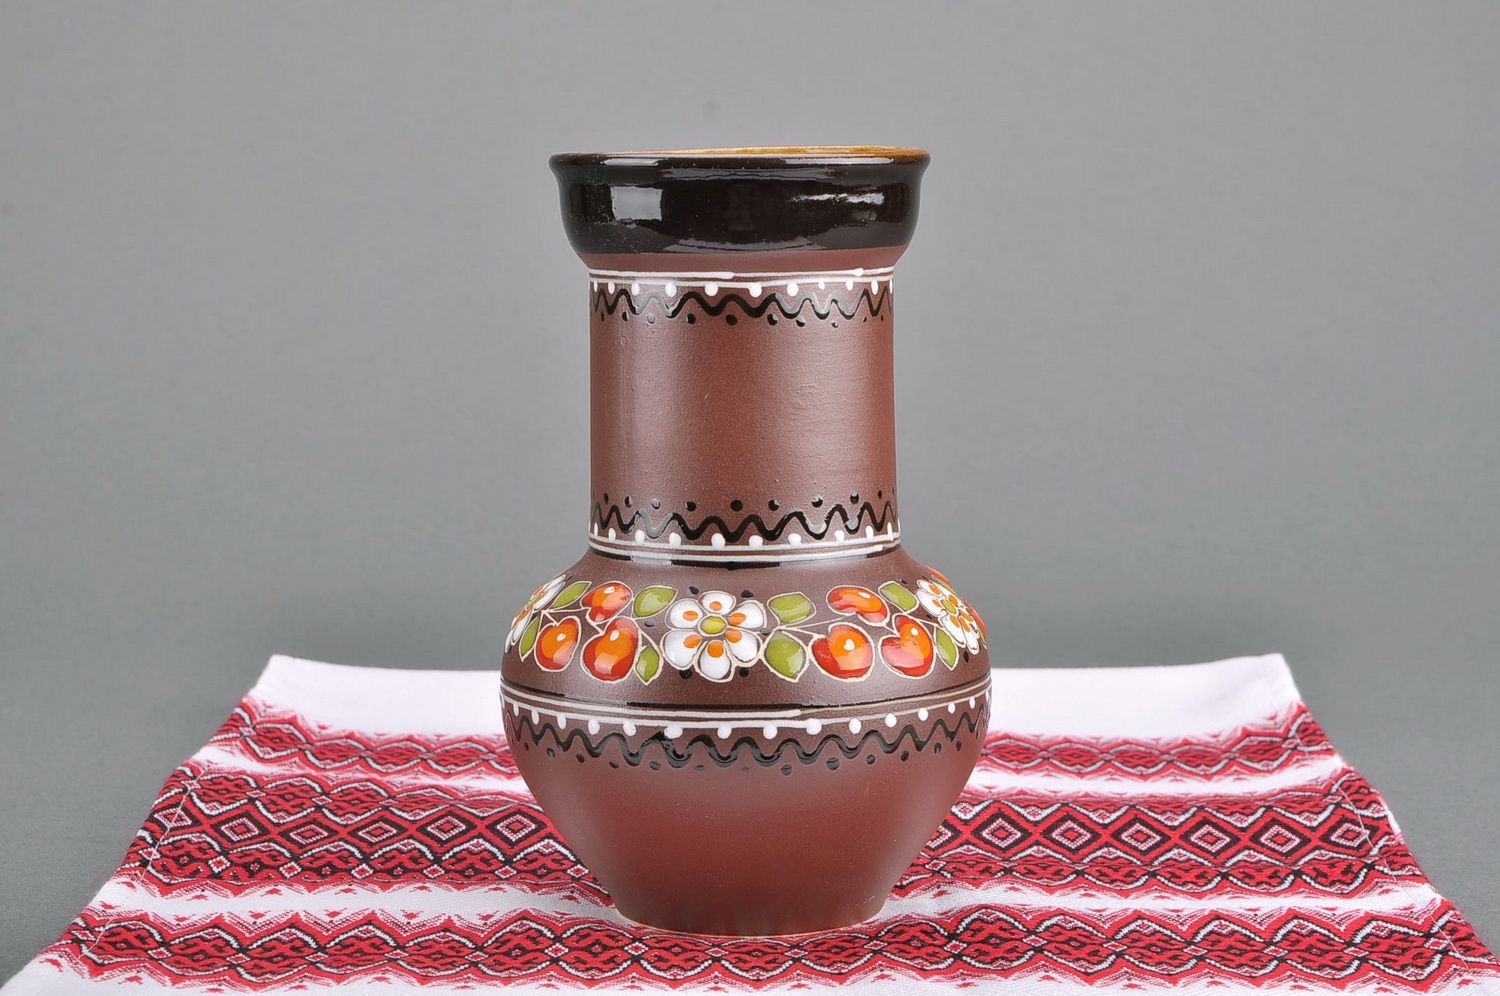 60 oz ceramic milk pitcher jug in brown color with ethnic decoration painting 1,2 lb photo 1